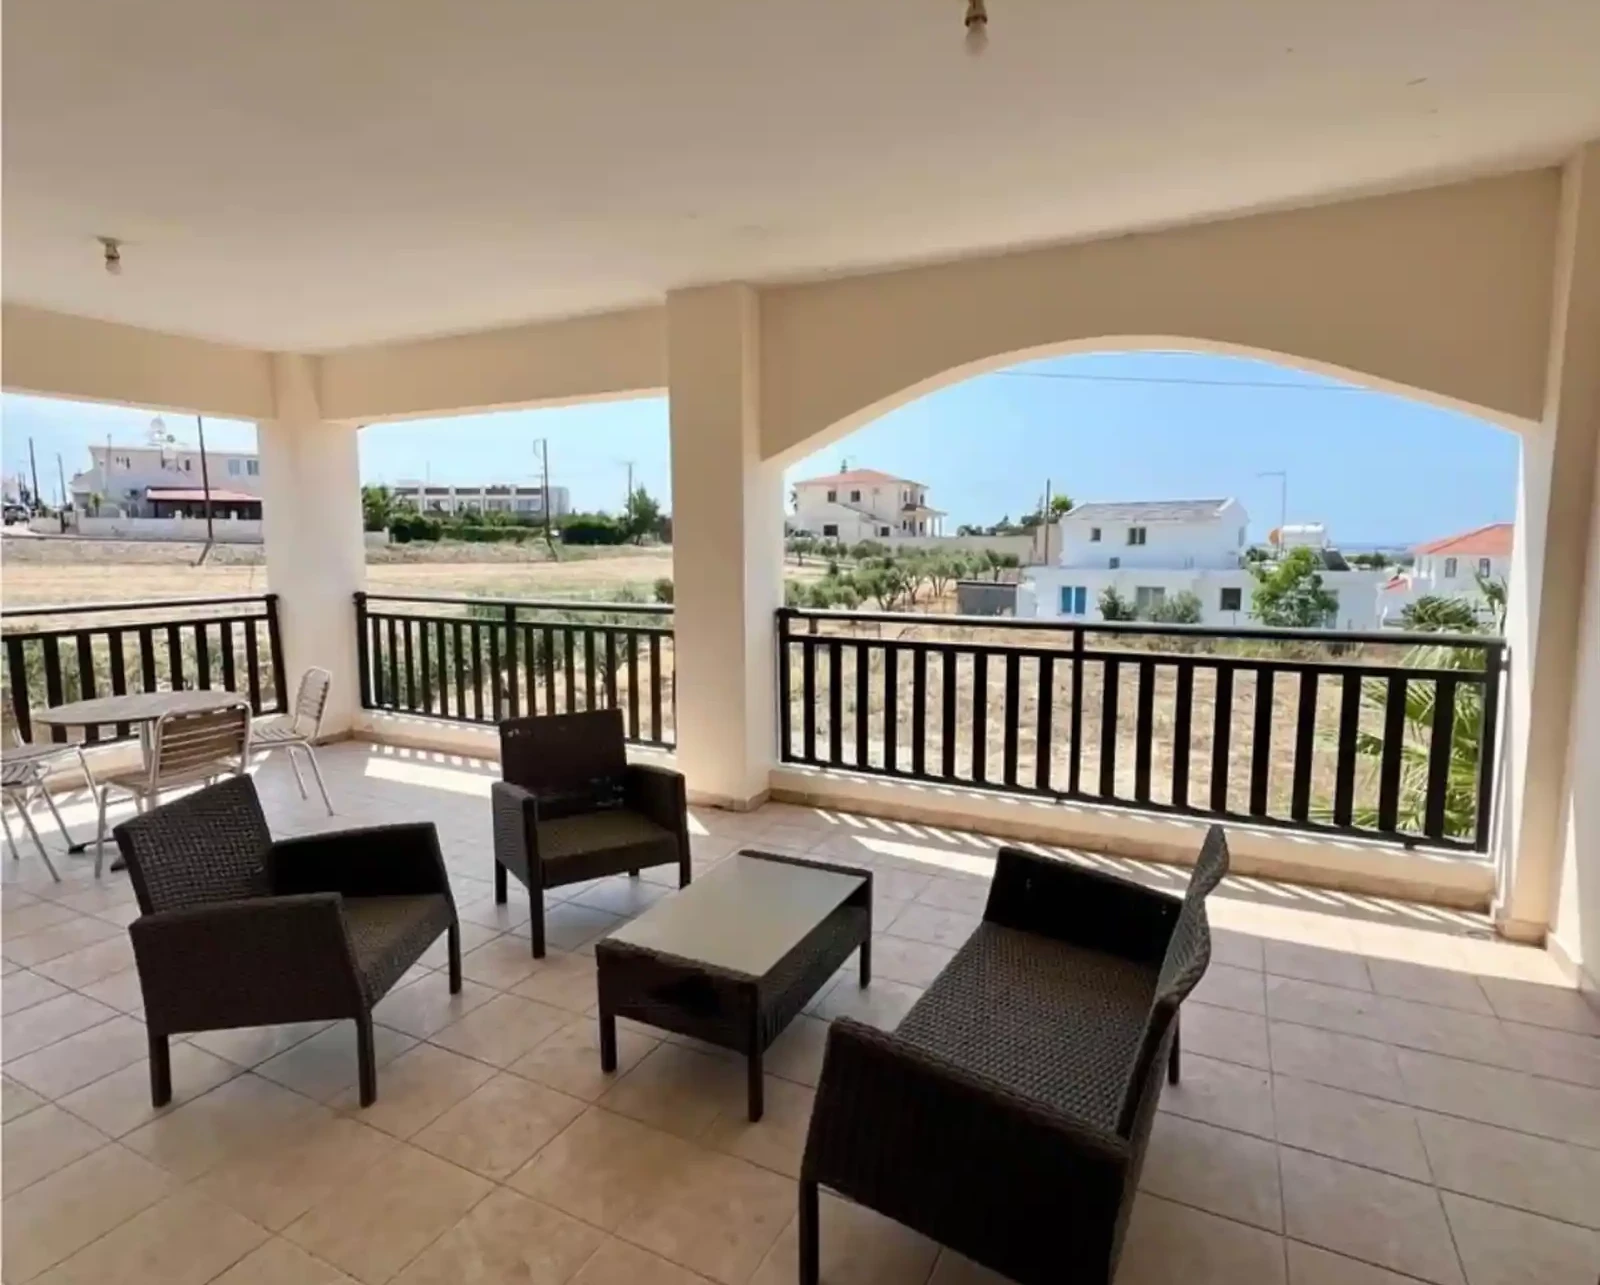 2-bedroom apartment fоr sаle €128.000, image 1